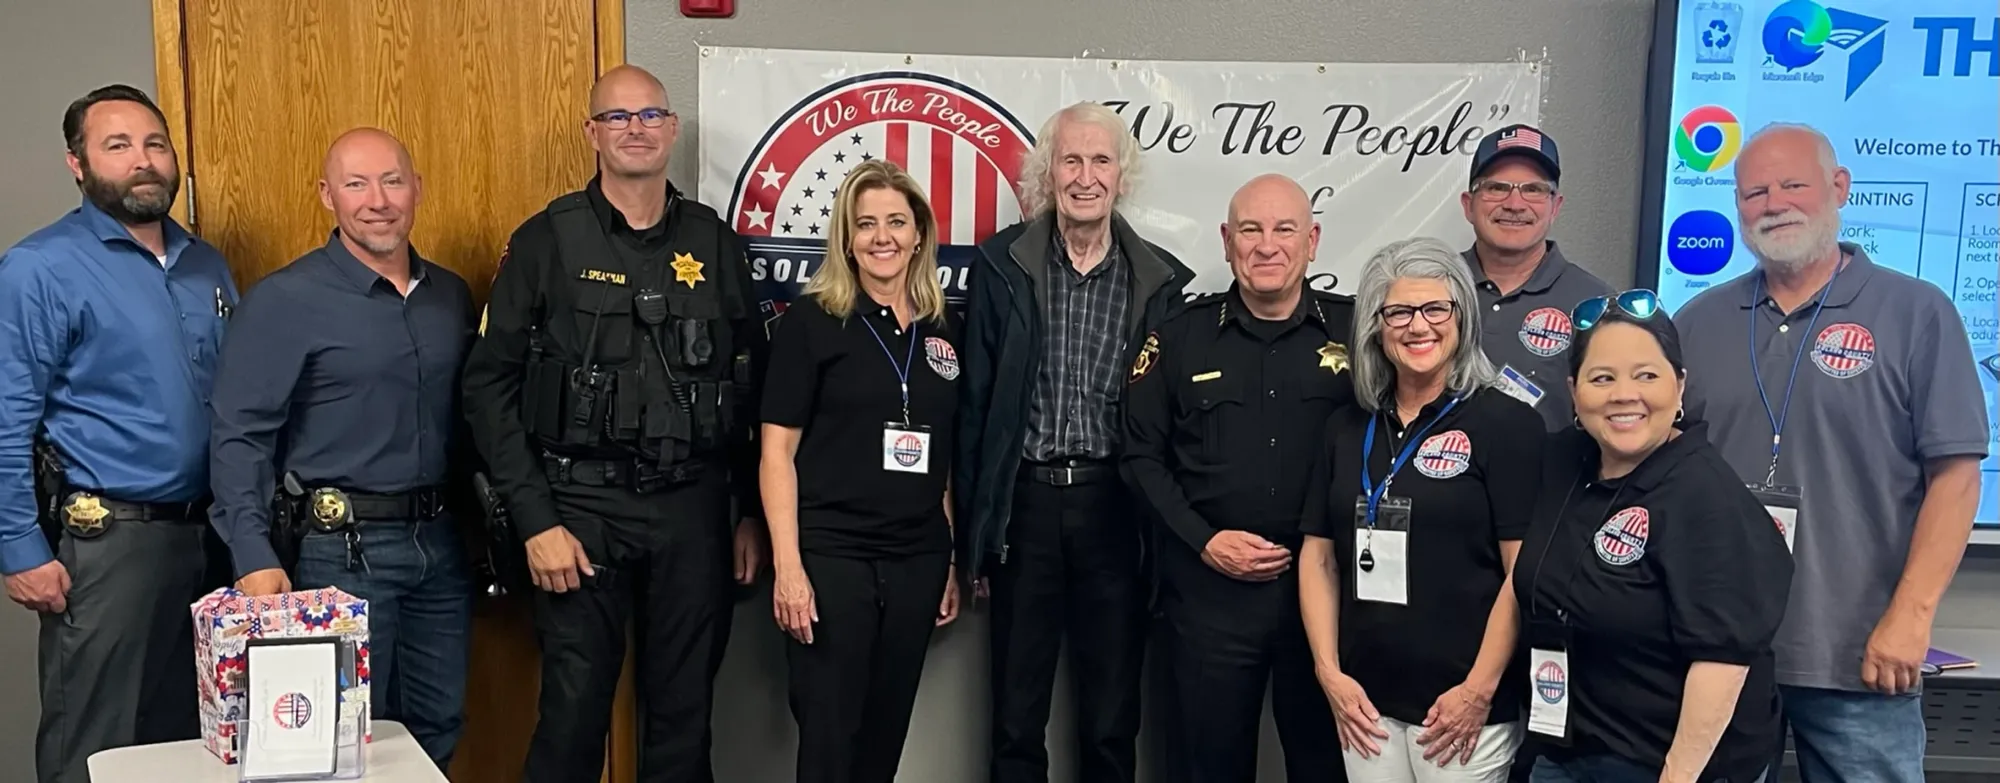 Solano Sheriff Tom Ferrara met with members of the Solano Committee of Safety